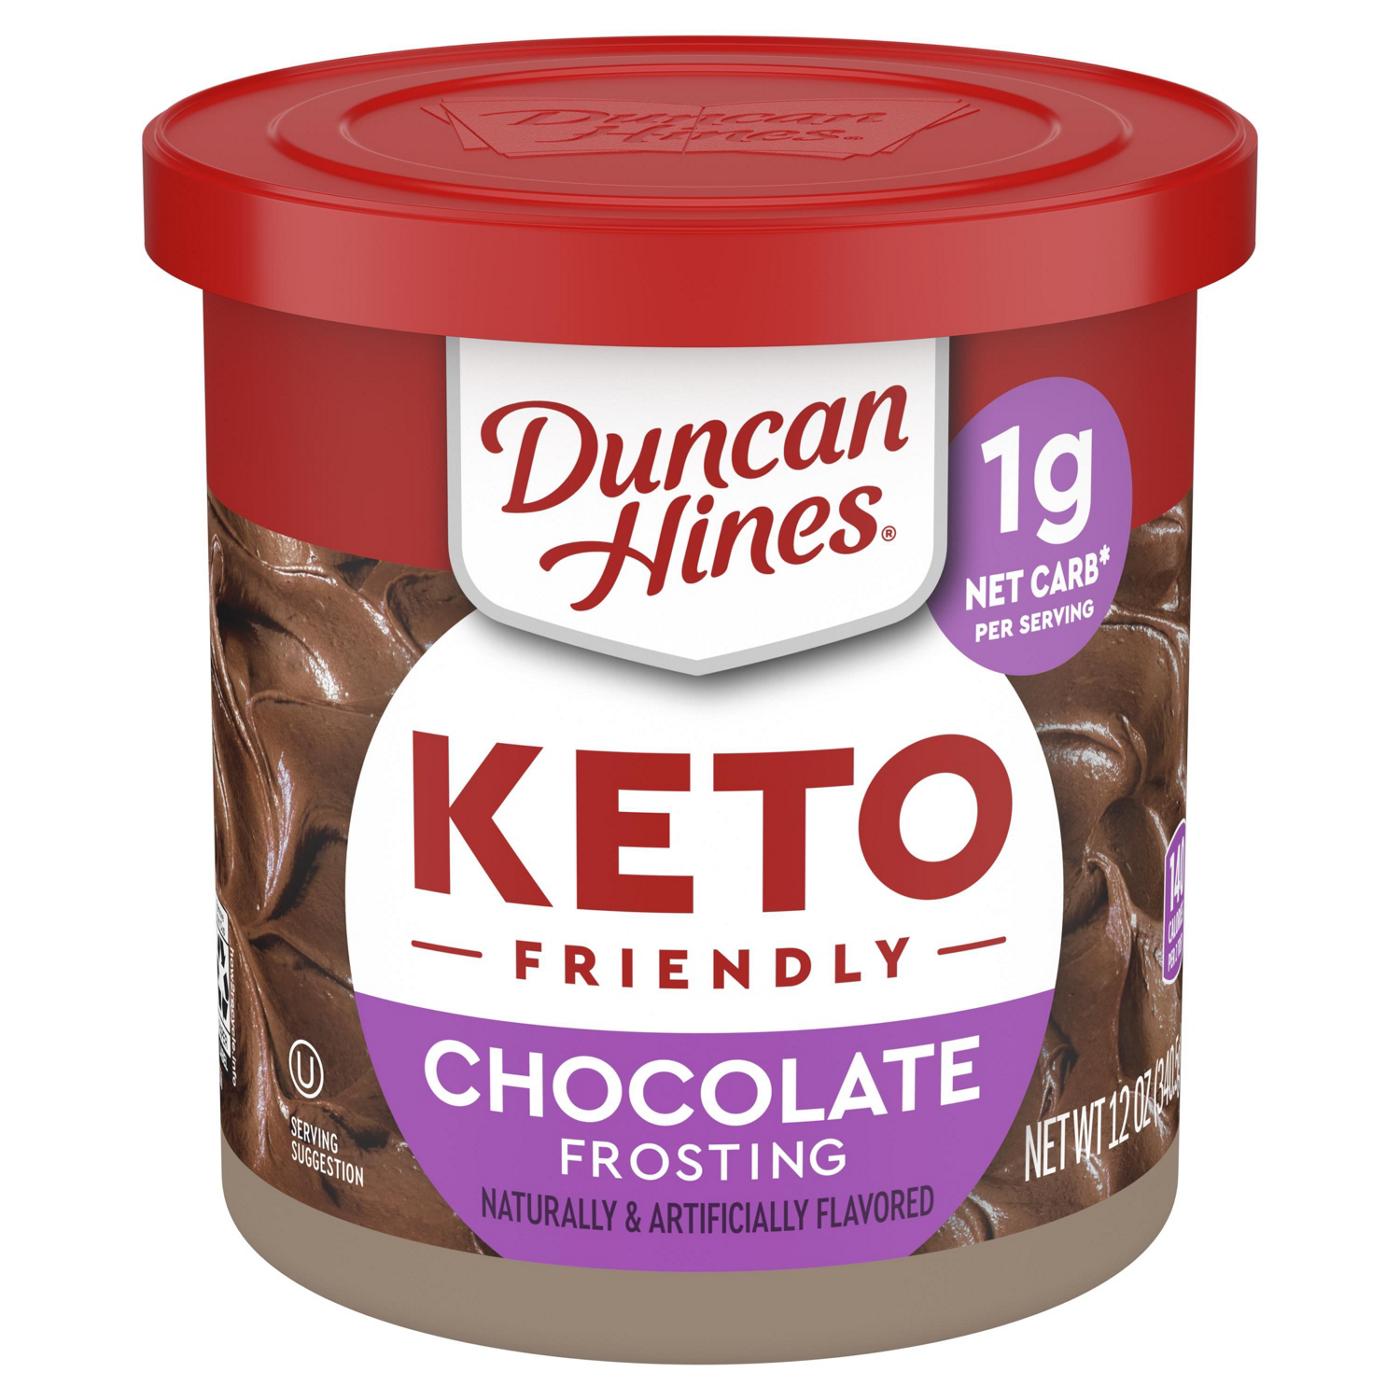 Duncan Hines Keto Friendly Chocolate Frosting; image 1 of 3